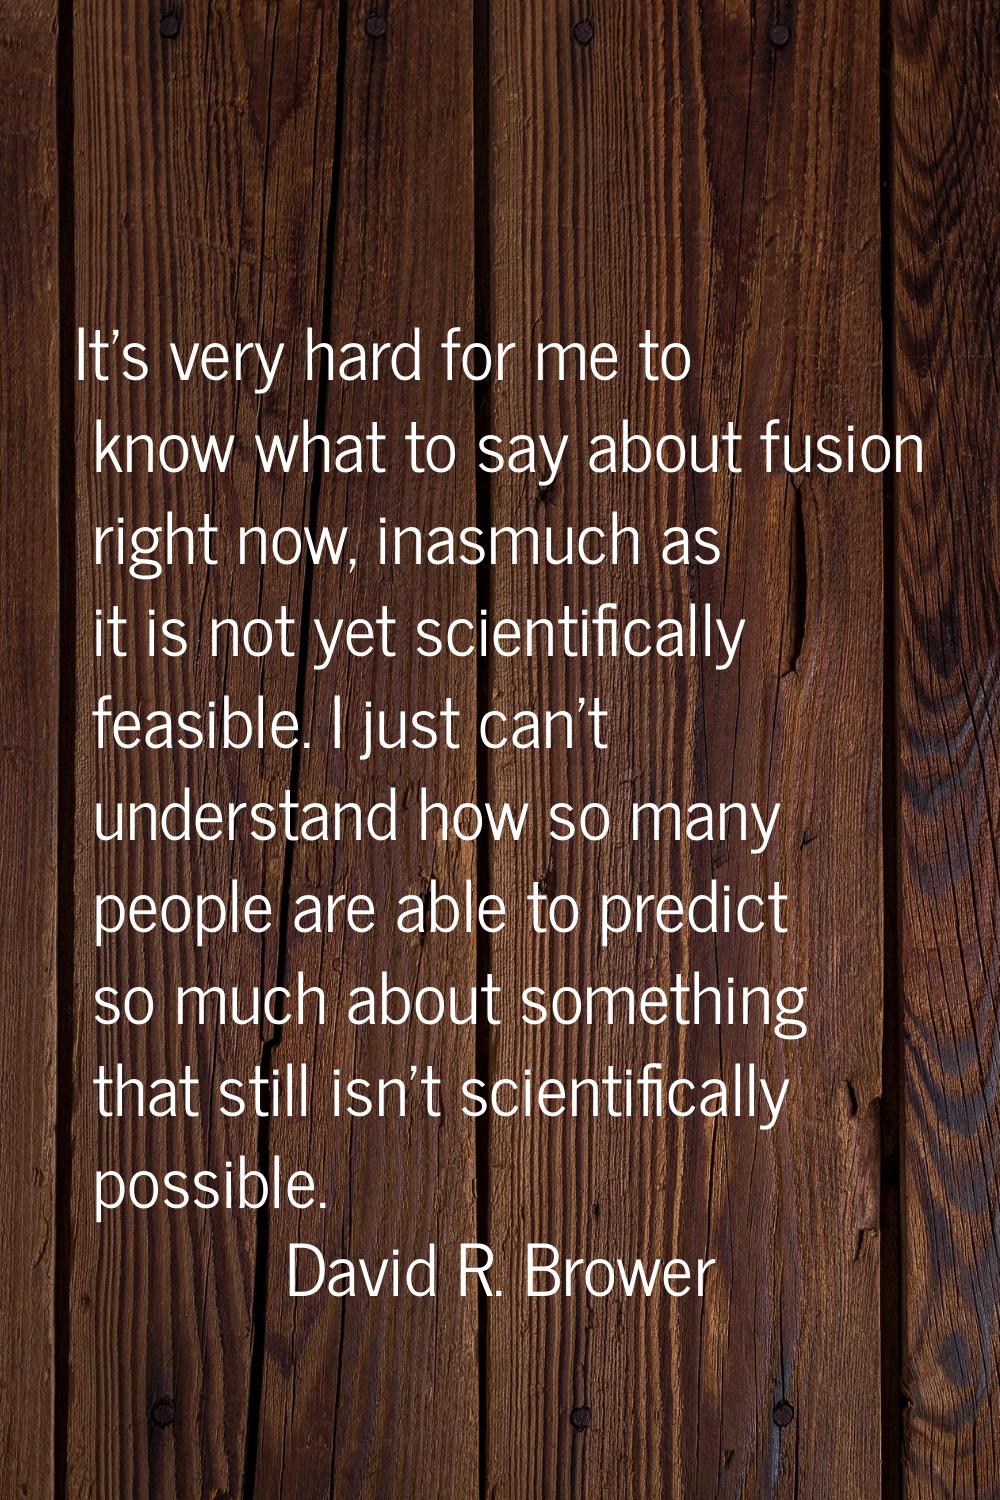 It's very hard for me to know what to say about fusion right now, inasmuch as it is not yet scienti